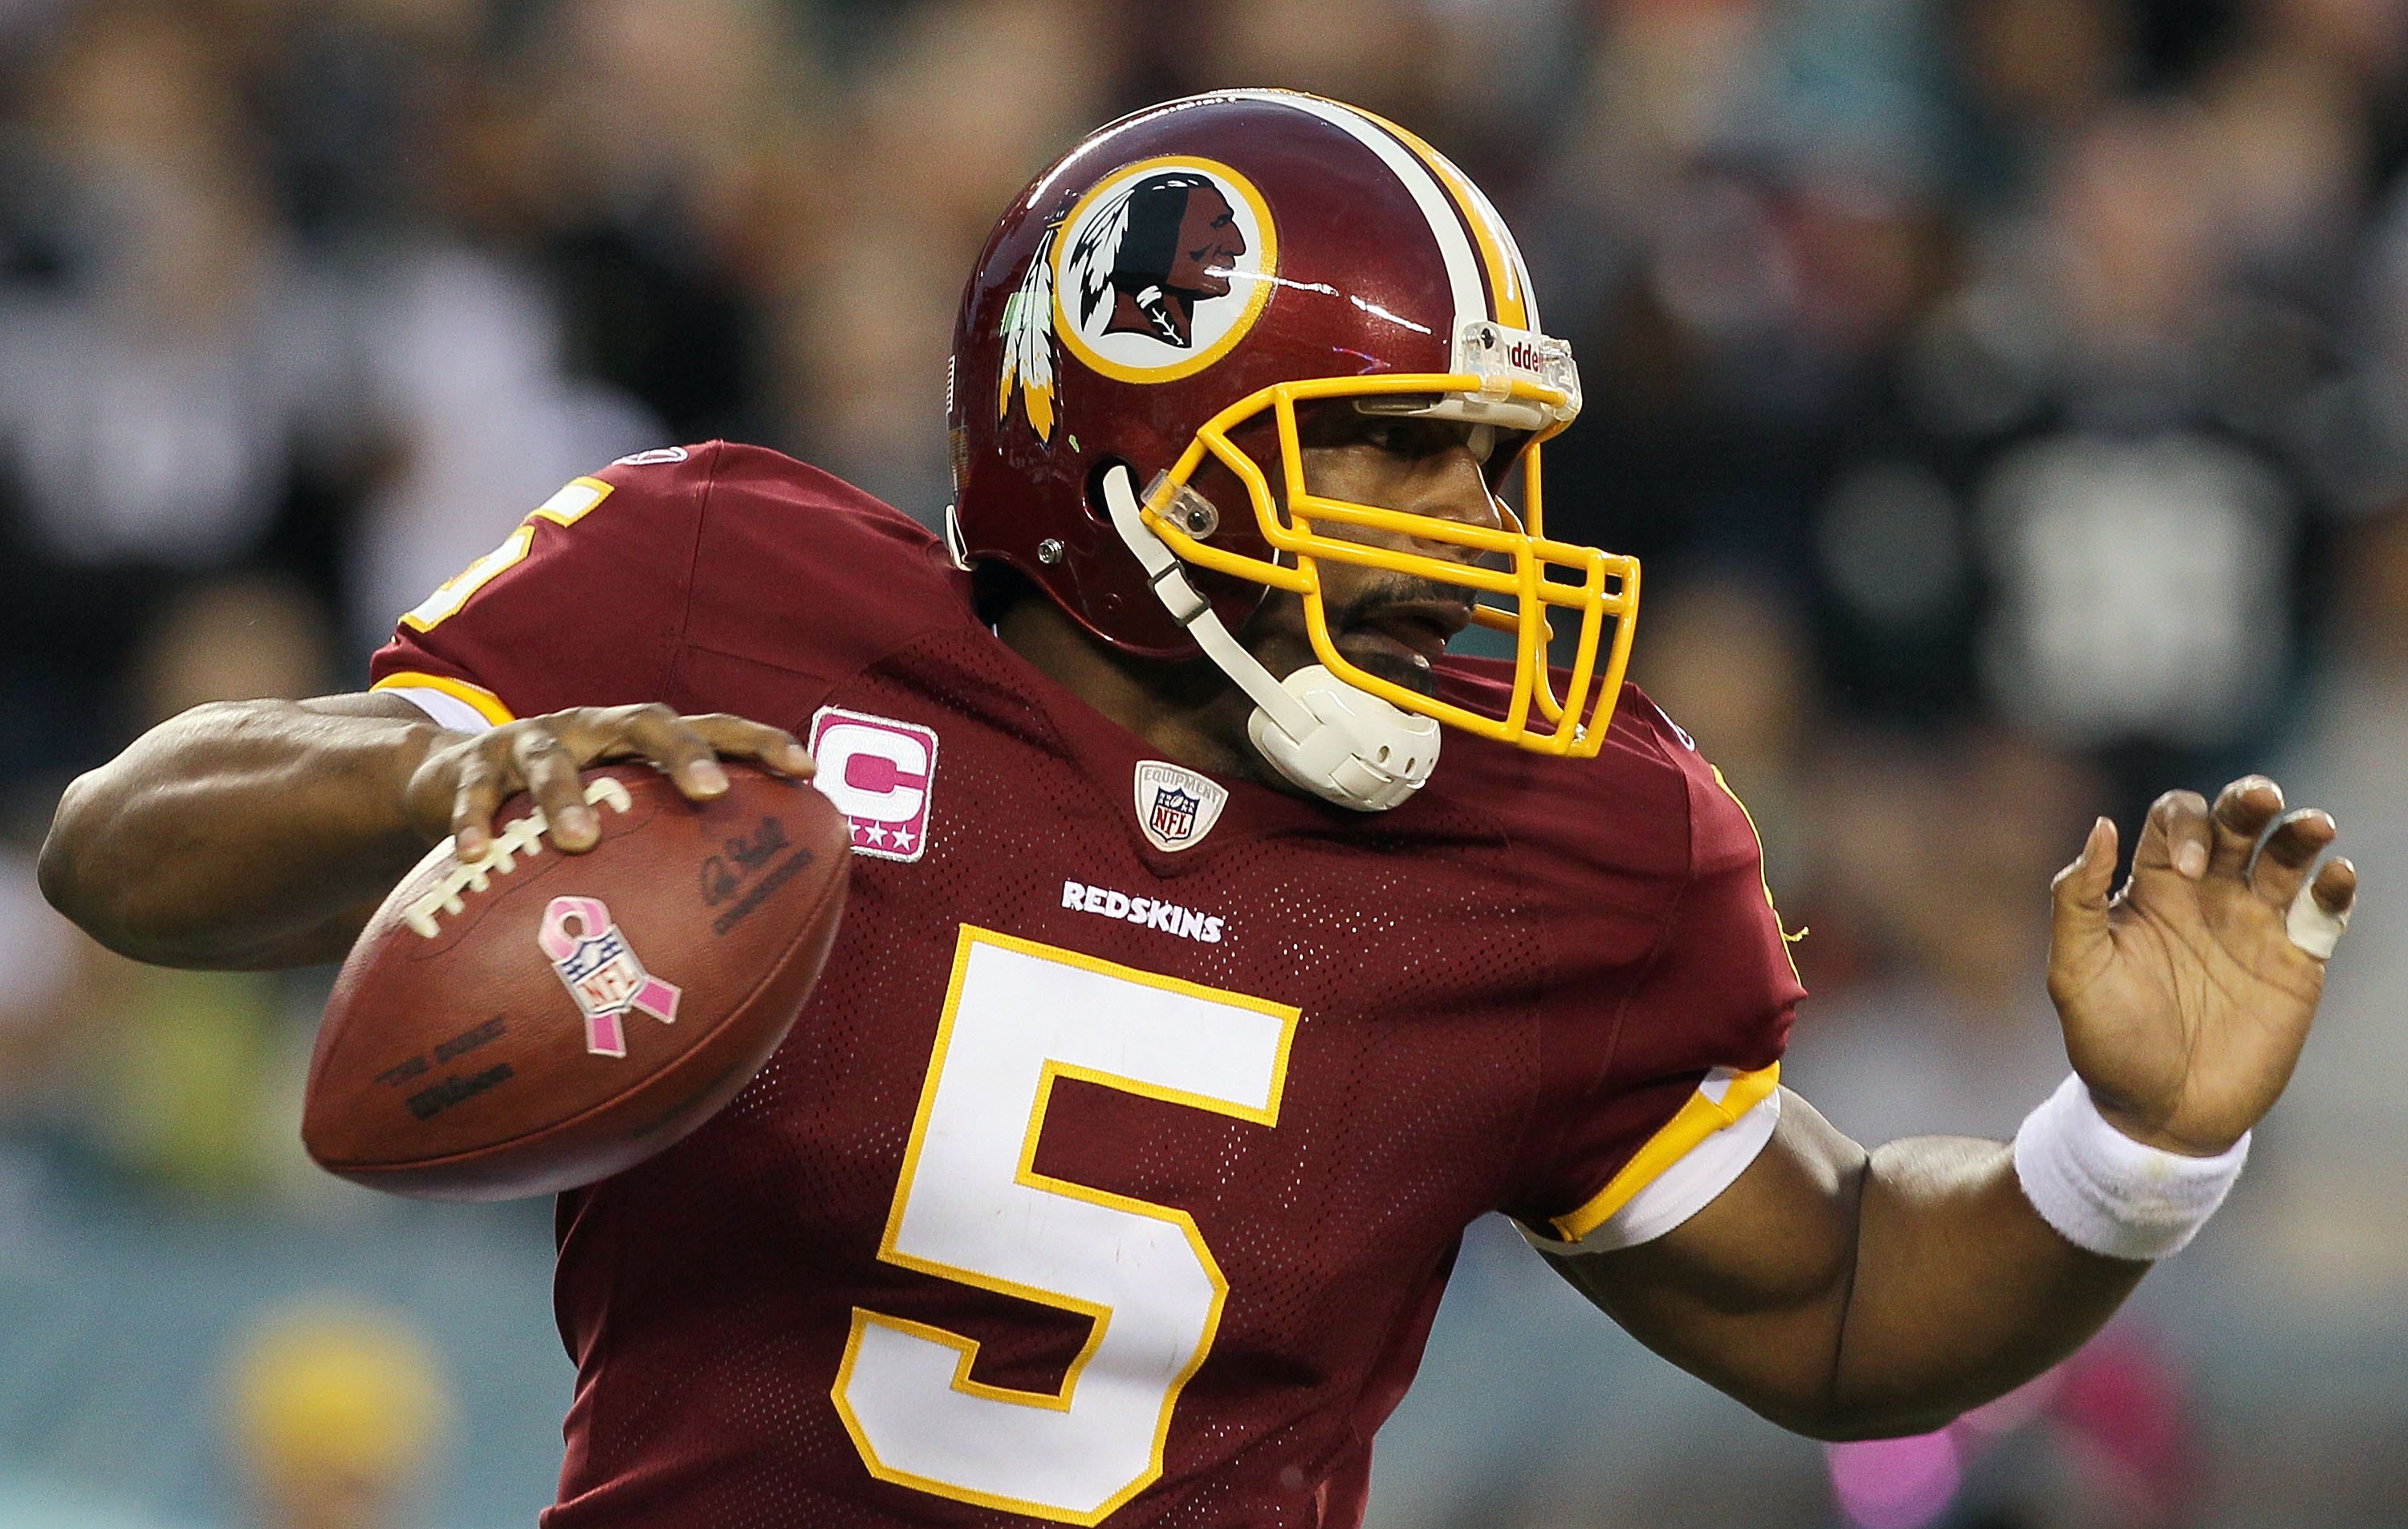 Donovan McNabb Benched: Odds On Where He Will Play Next Year